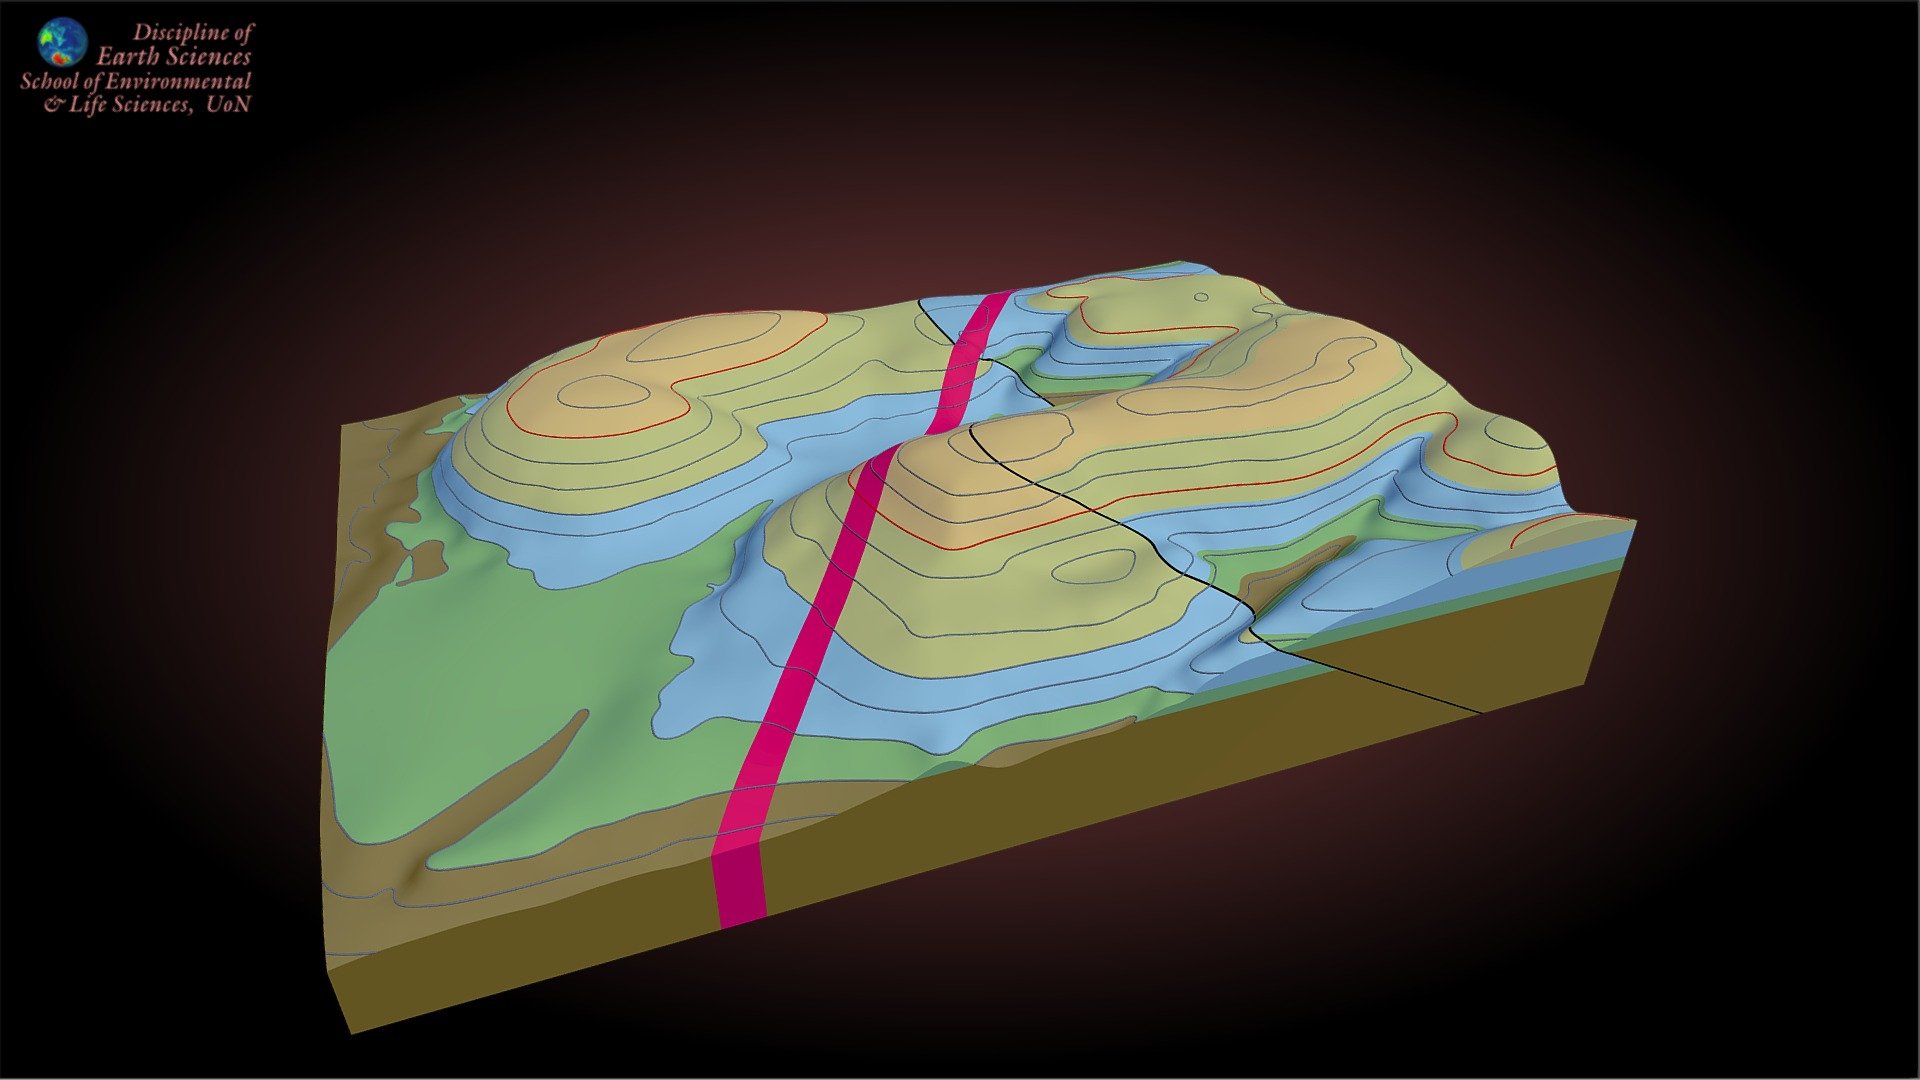 3D geological model with topography - 3D model by Earth Sciences